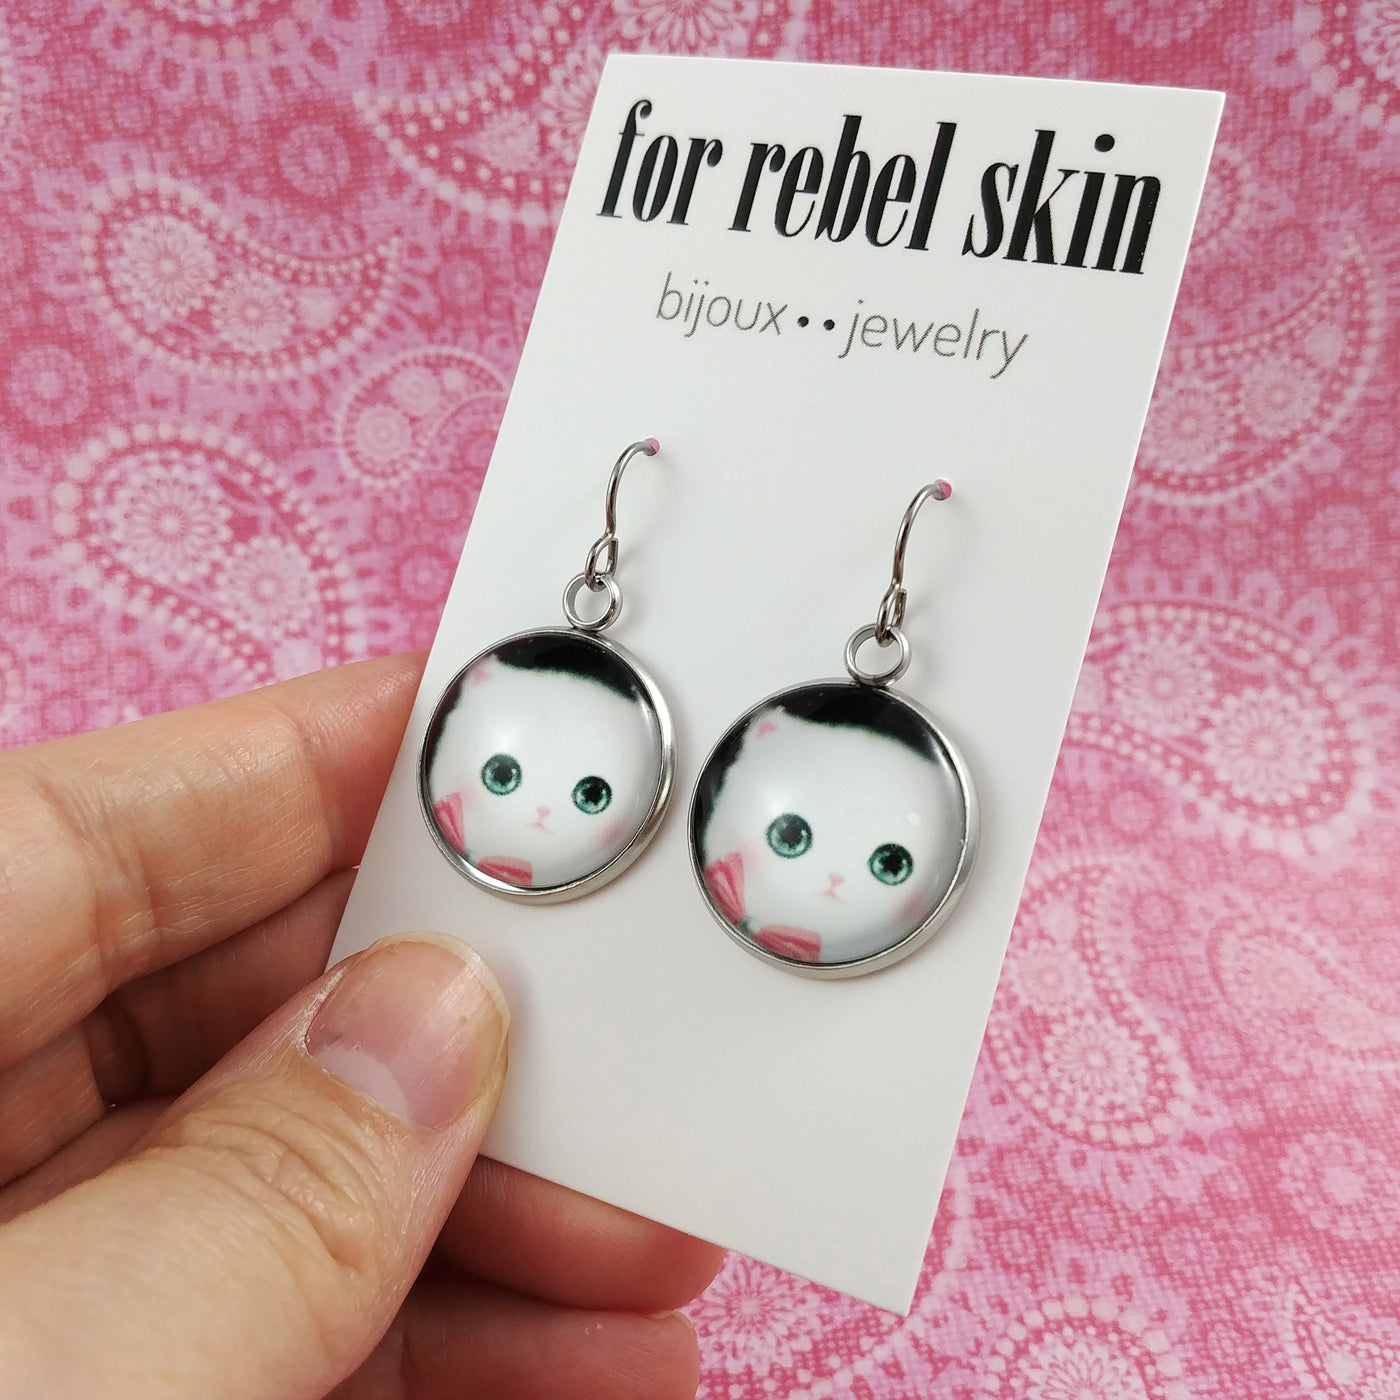 Kitty dangle earrings - Hypoallergenic pure titanium, stainless steel and glass jewelry